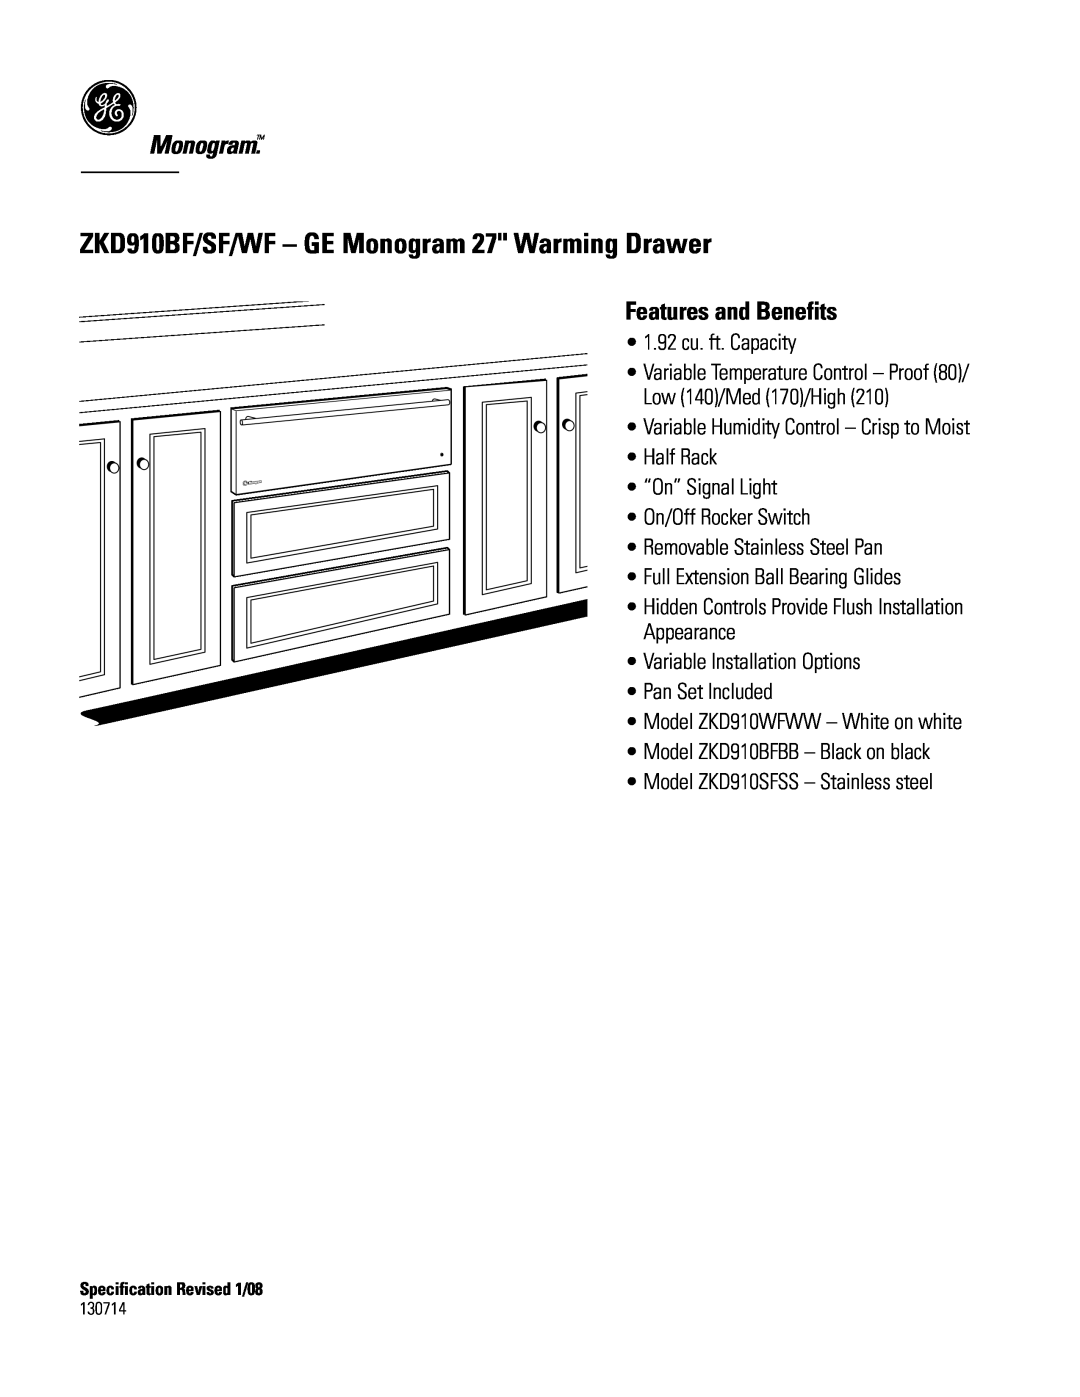 GE dimensions ZKD910BF/SF/WF - GE Monogram 27 Warming Drawer, Features and Benefits 